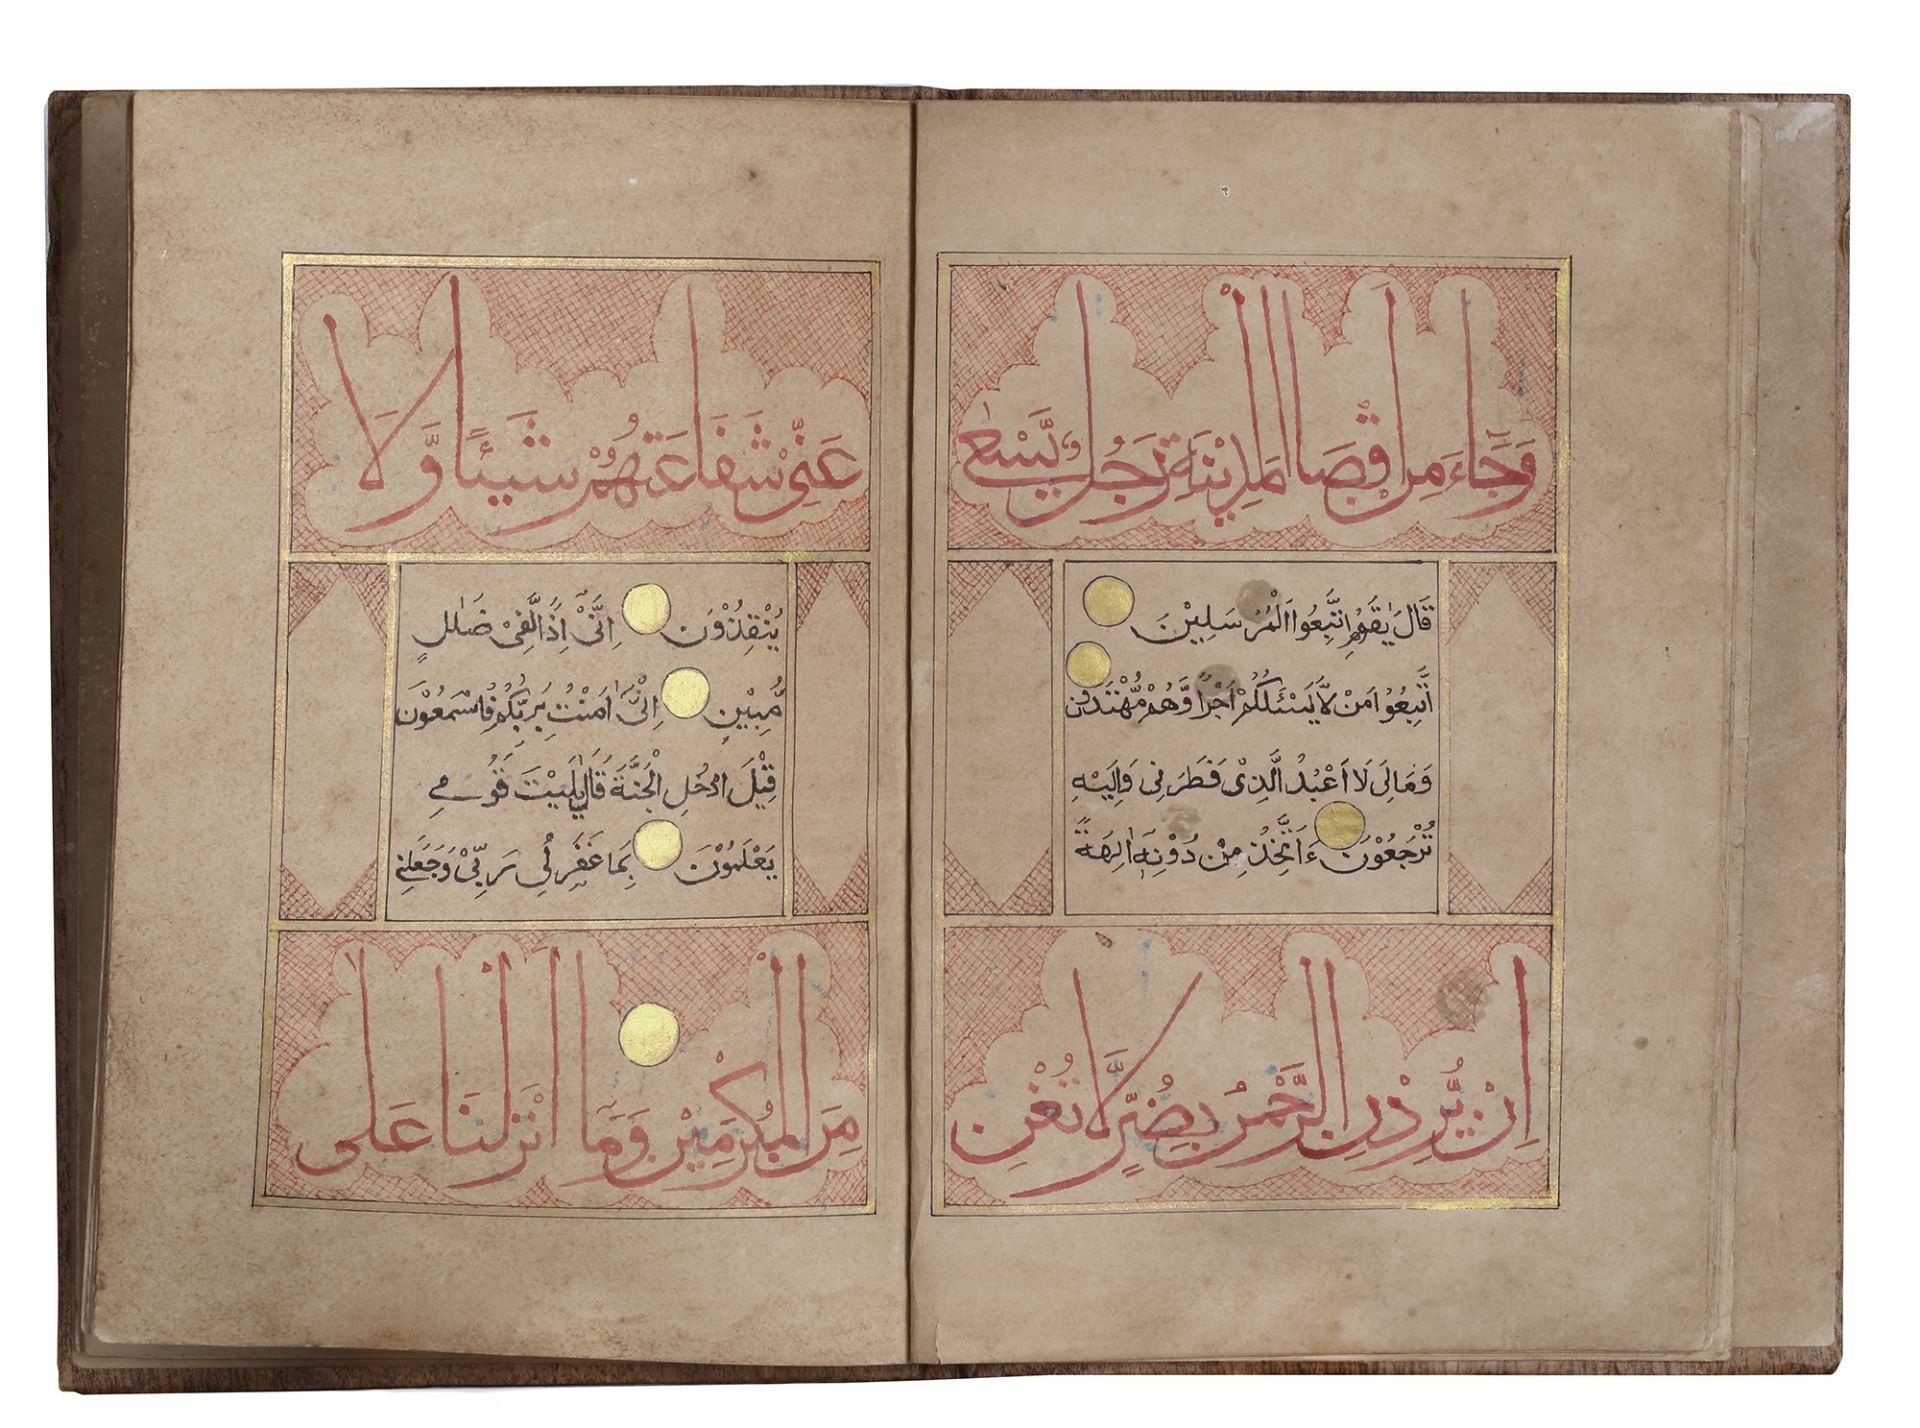 A QURAN SECTION WRITTEN BY MEHMET SELIM VASFI, OTTOMAN TURKEY, DATED 1303 AH/1885 AD - Image 3 of 4